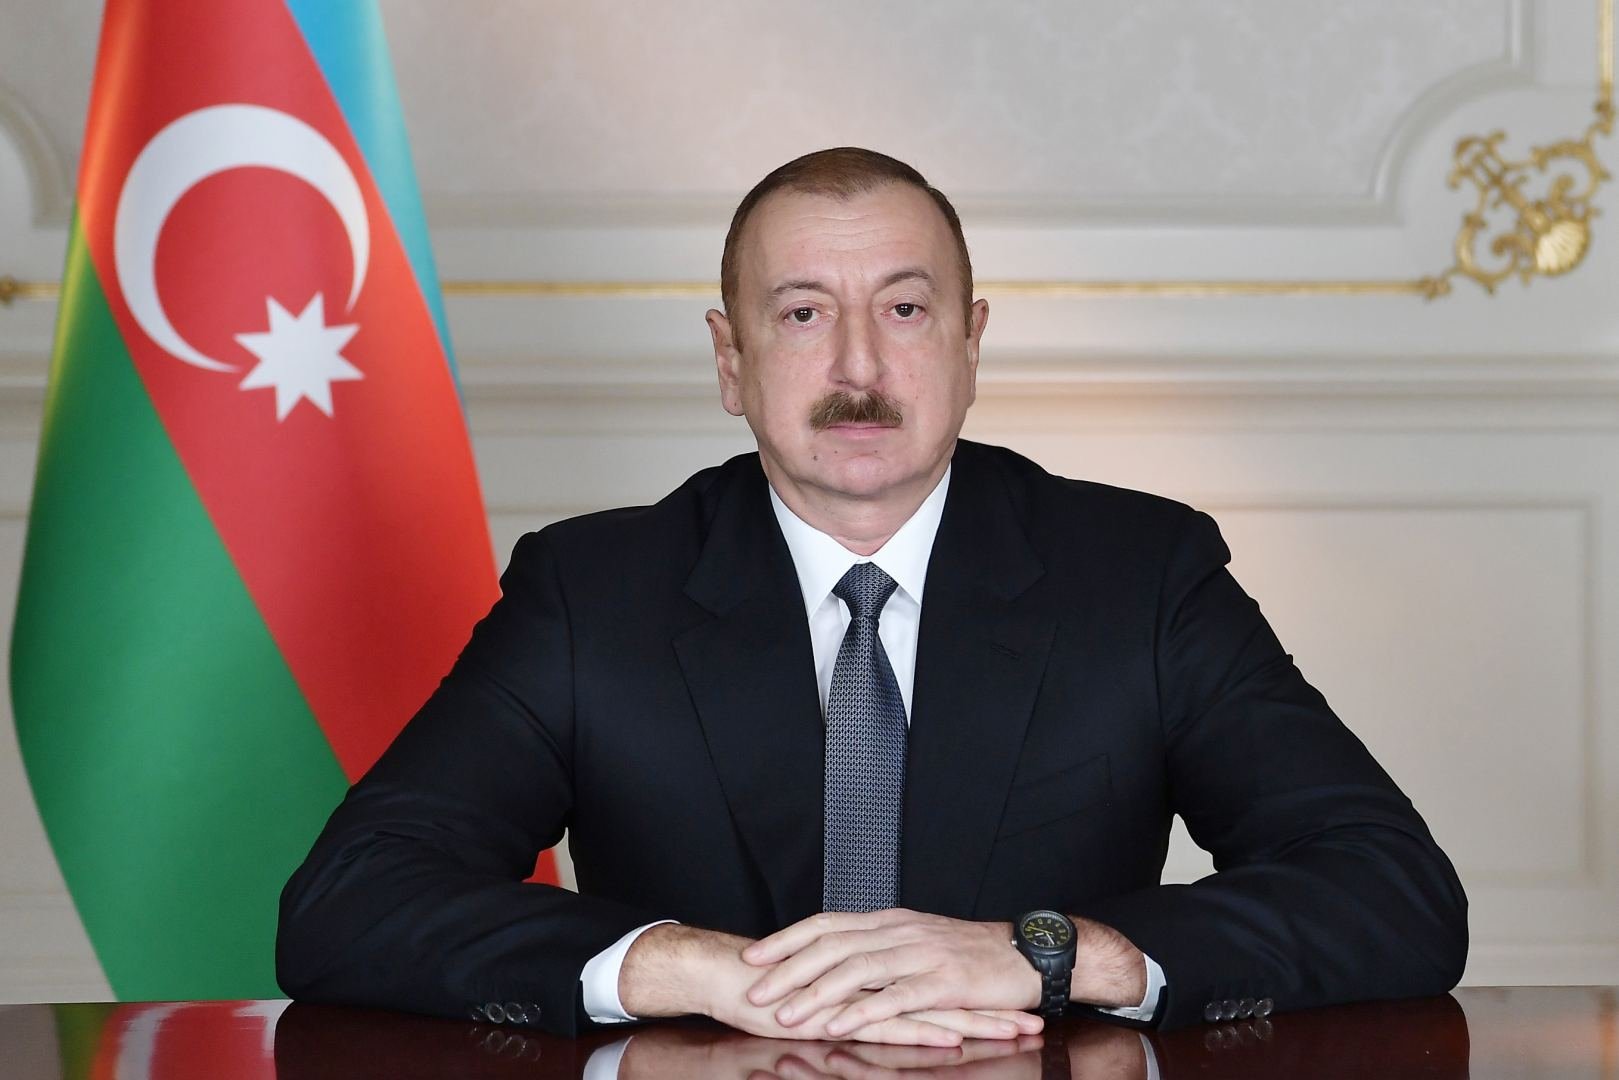 President Ilham Aliyev attends event dedicated to UAE National Day in Dubai